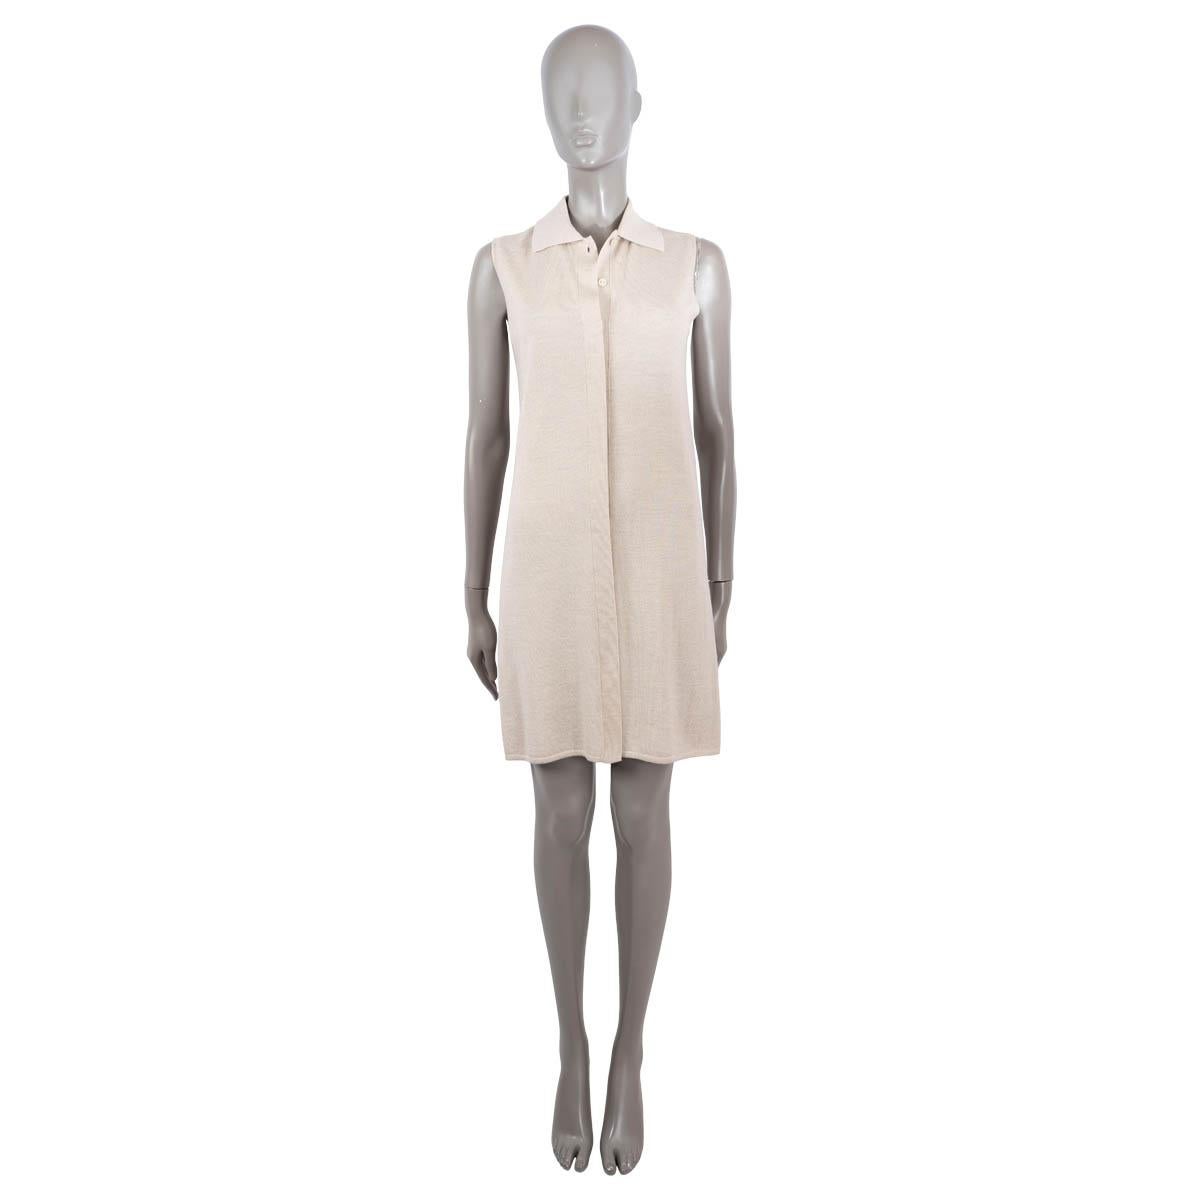 100% authentic Chanel shirt knit dress in taupe wool (100%). Closes with buttons on the front. Has been worn and is in excellent condition.

2000 Fall/Winter

Measurements
Model	00A U01328 V00856
Tag Size	40
Size	M
Bust	88cm (34.3in) to 102cm